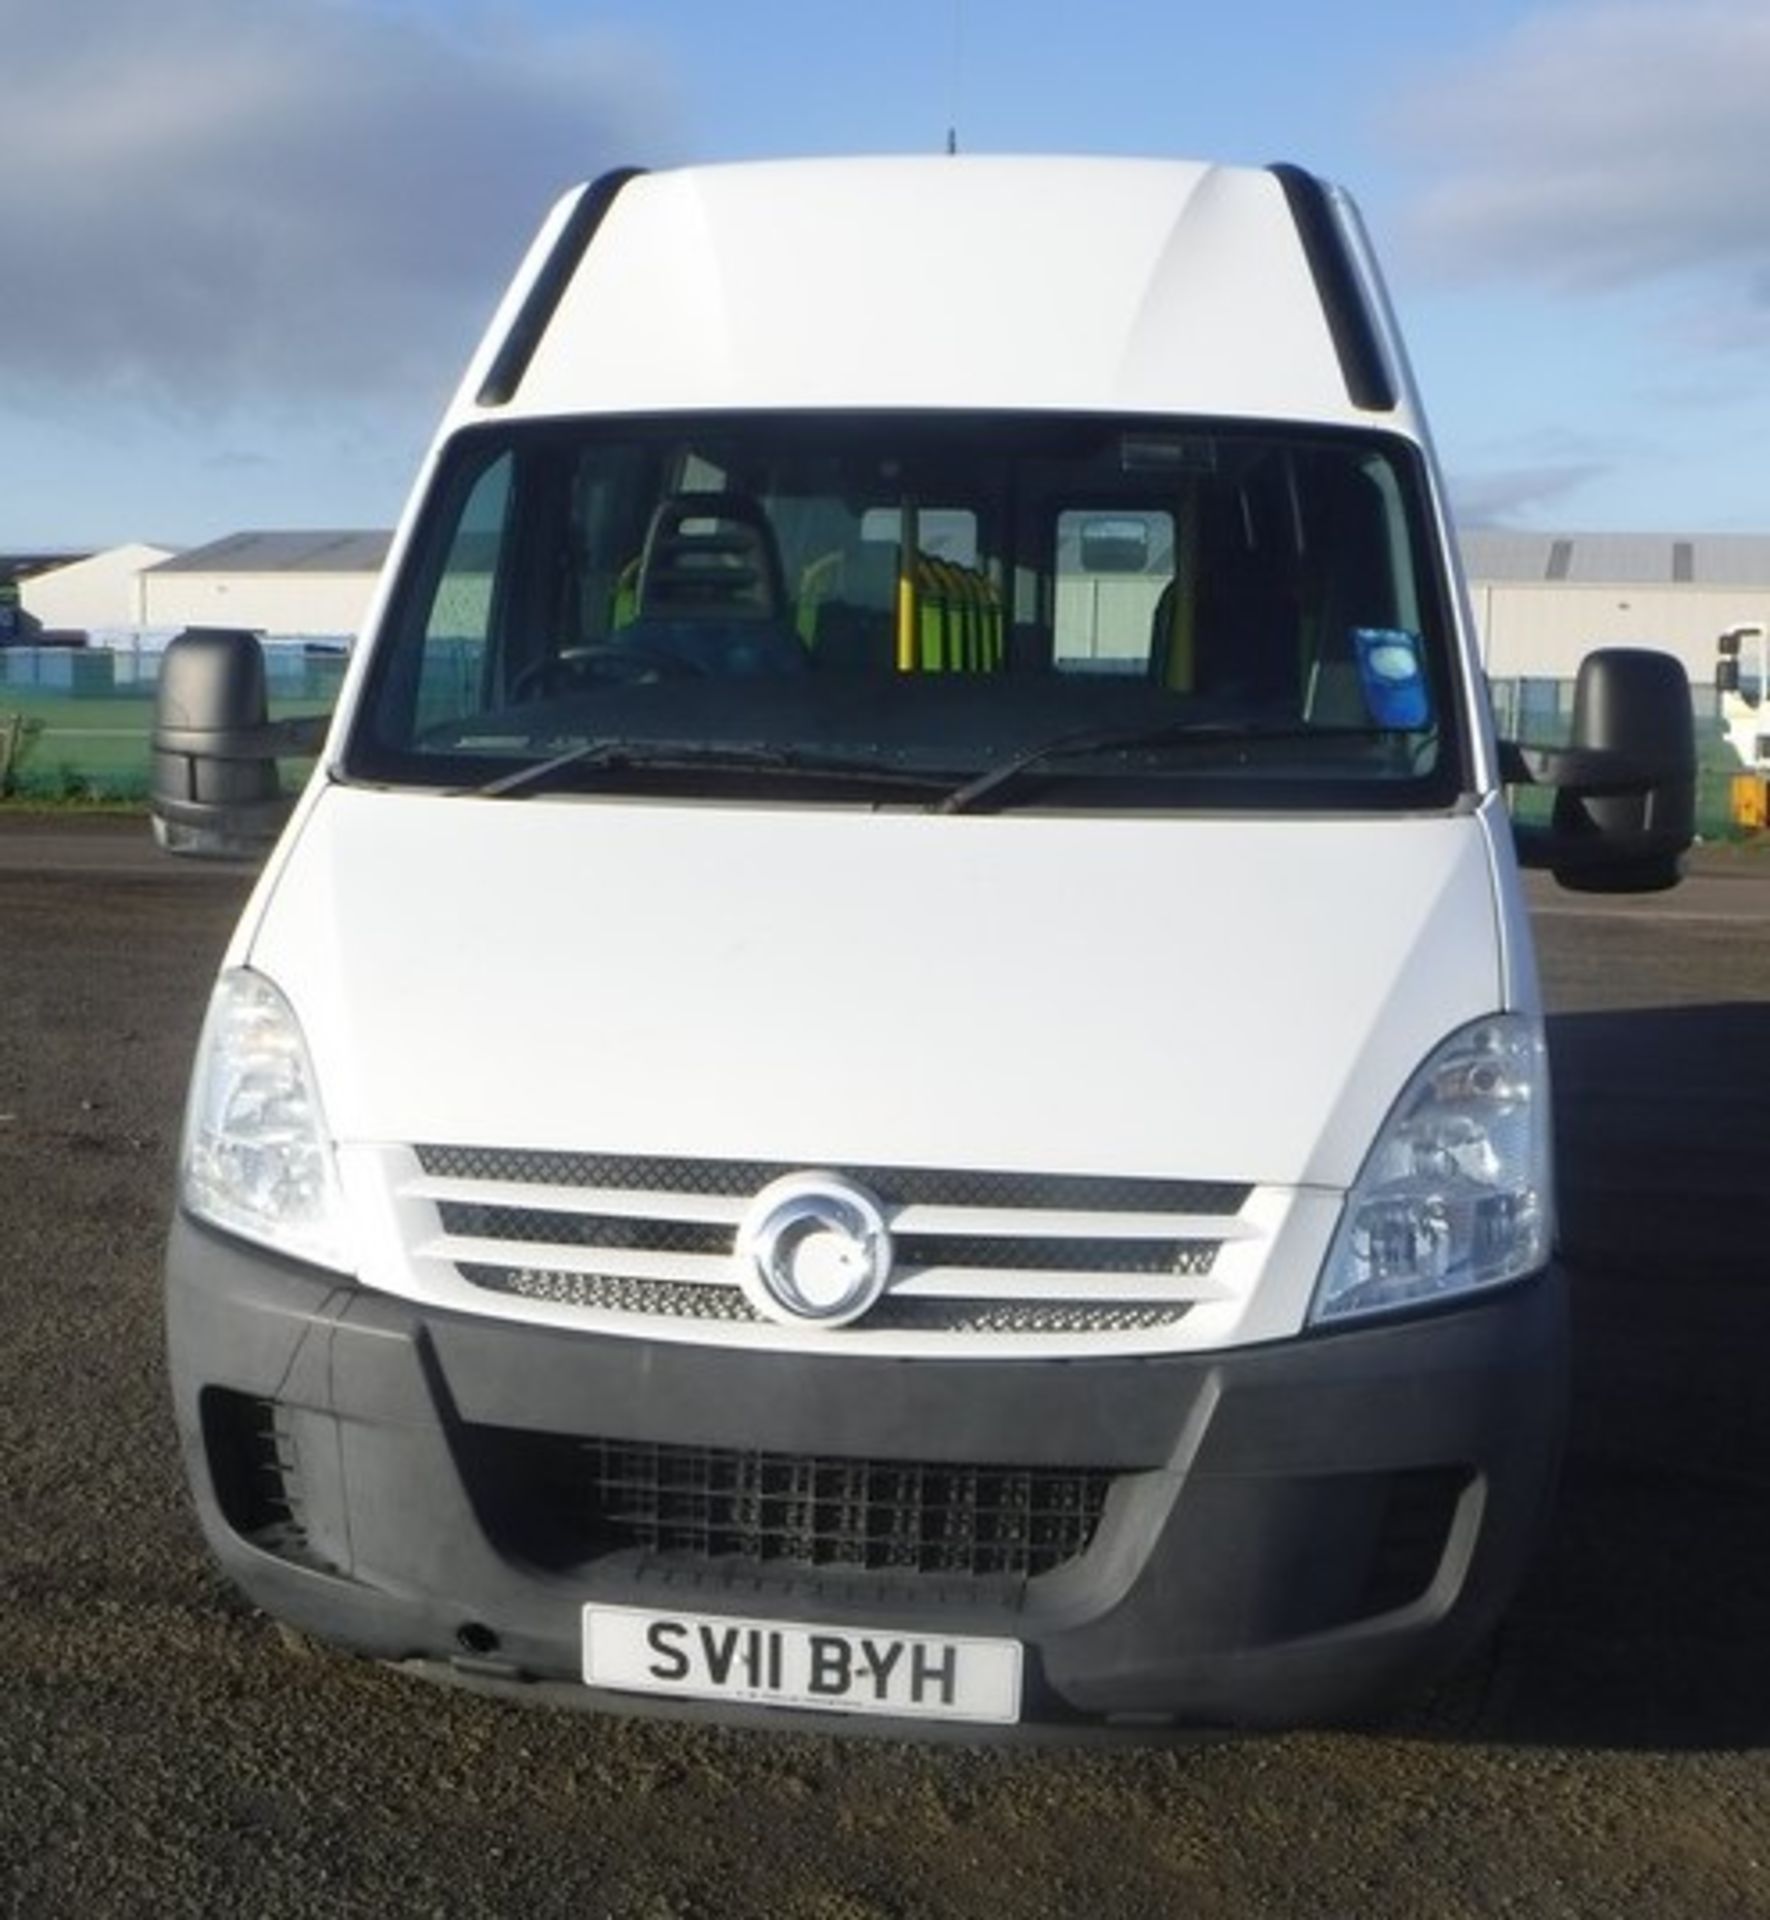 IVECO DAILY - 2998cc - Image 11 of 18